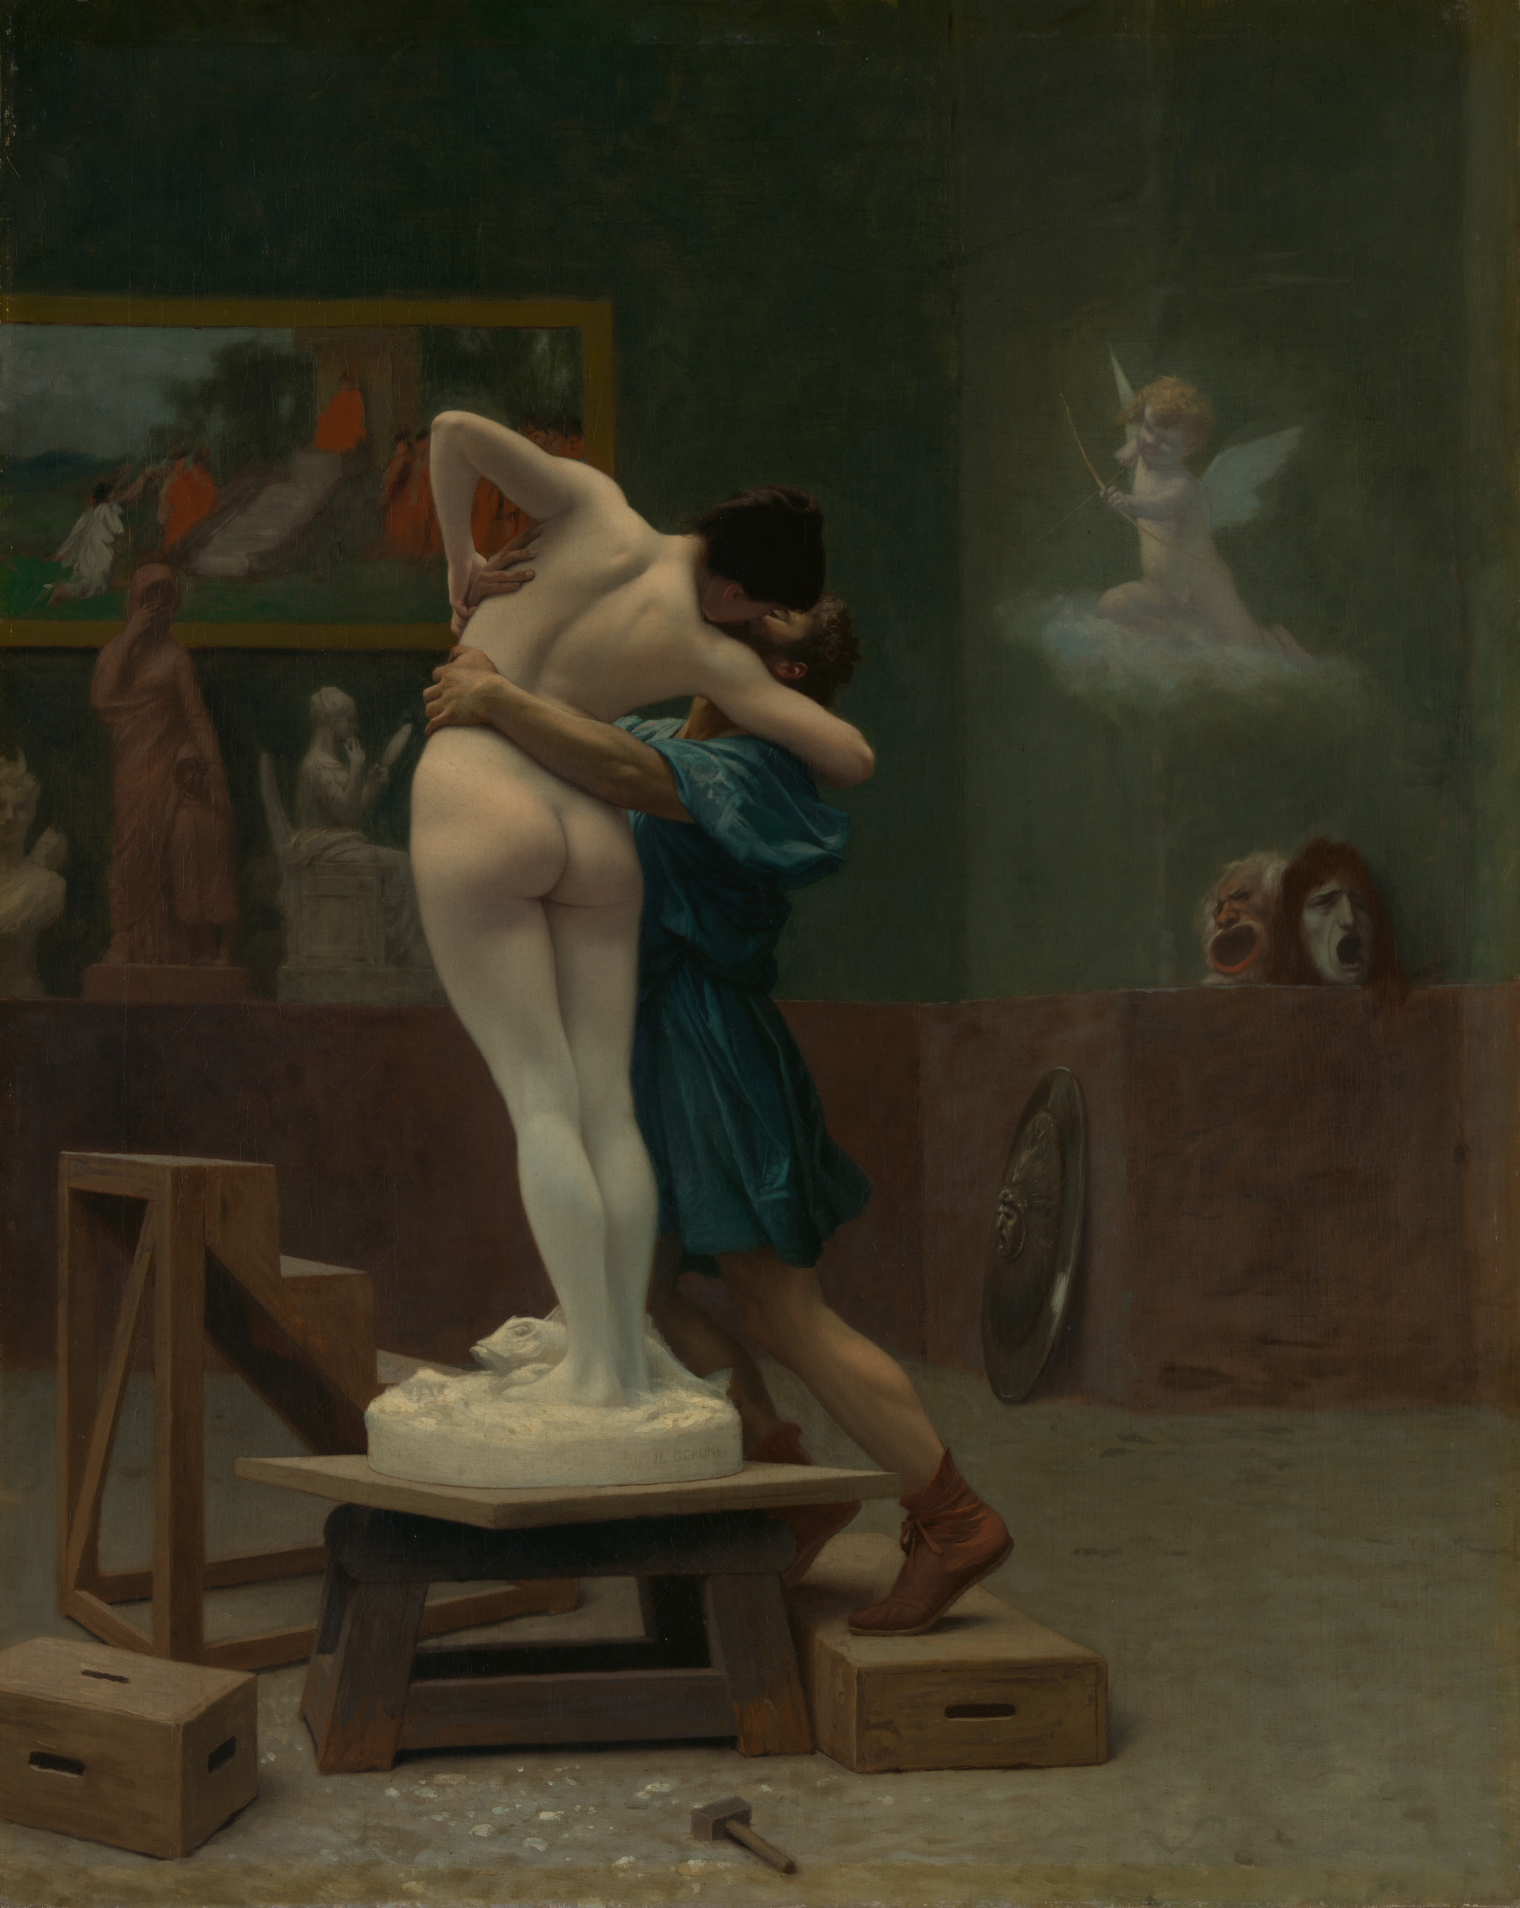 Painting of a studio setting where a man kisses a female sculpture that is brought to life by the goddess Venus, in fulfillment of Pygmalion’s wish for a wife as beautiful as the sculpture he created.